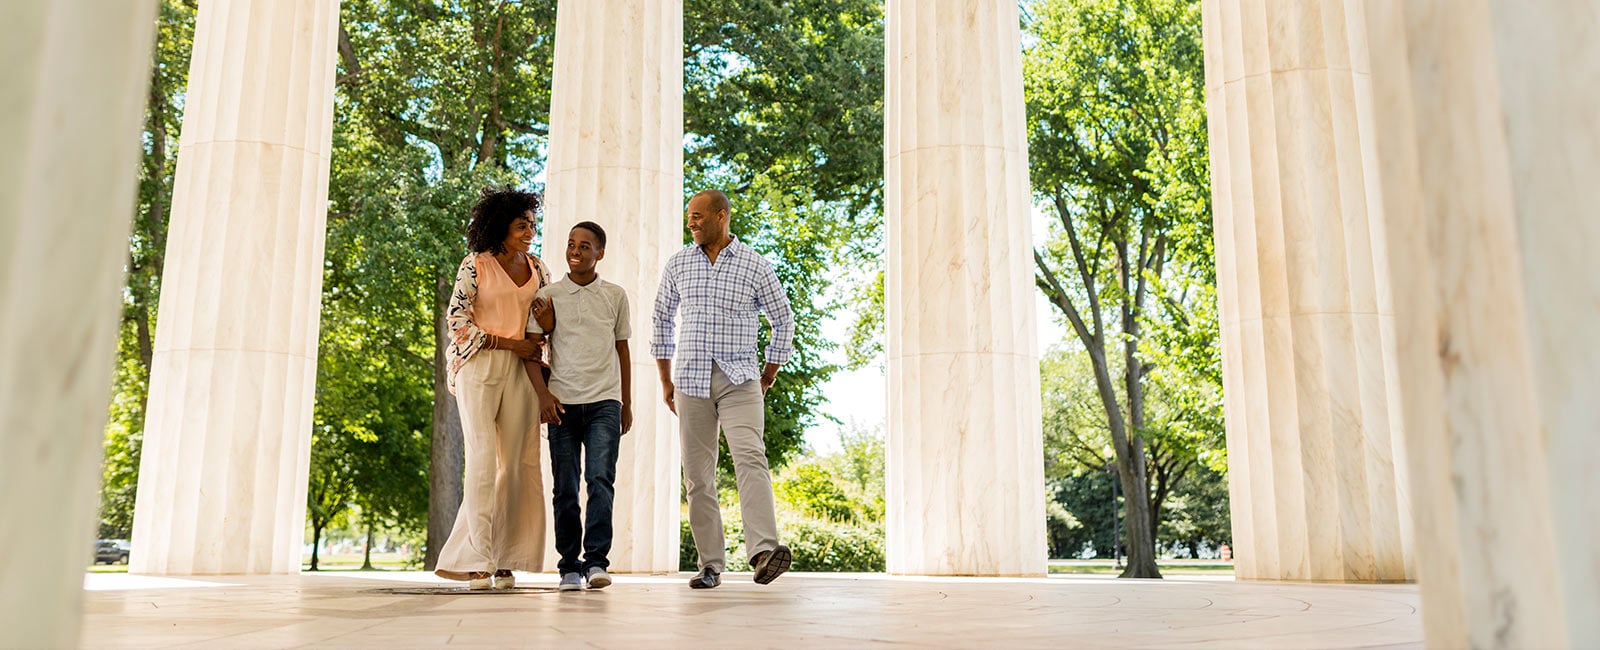 Enjoy A Vacation in Washington, D.C. with Hilton Grand Vacations